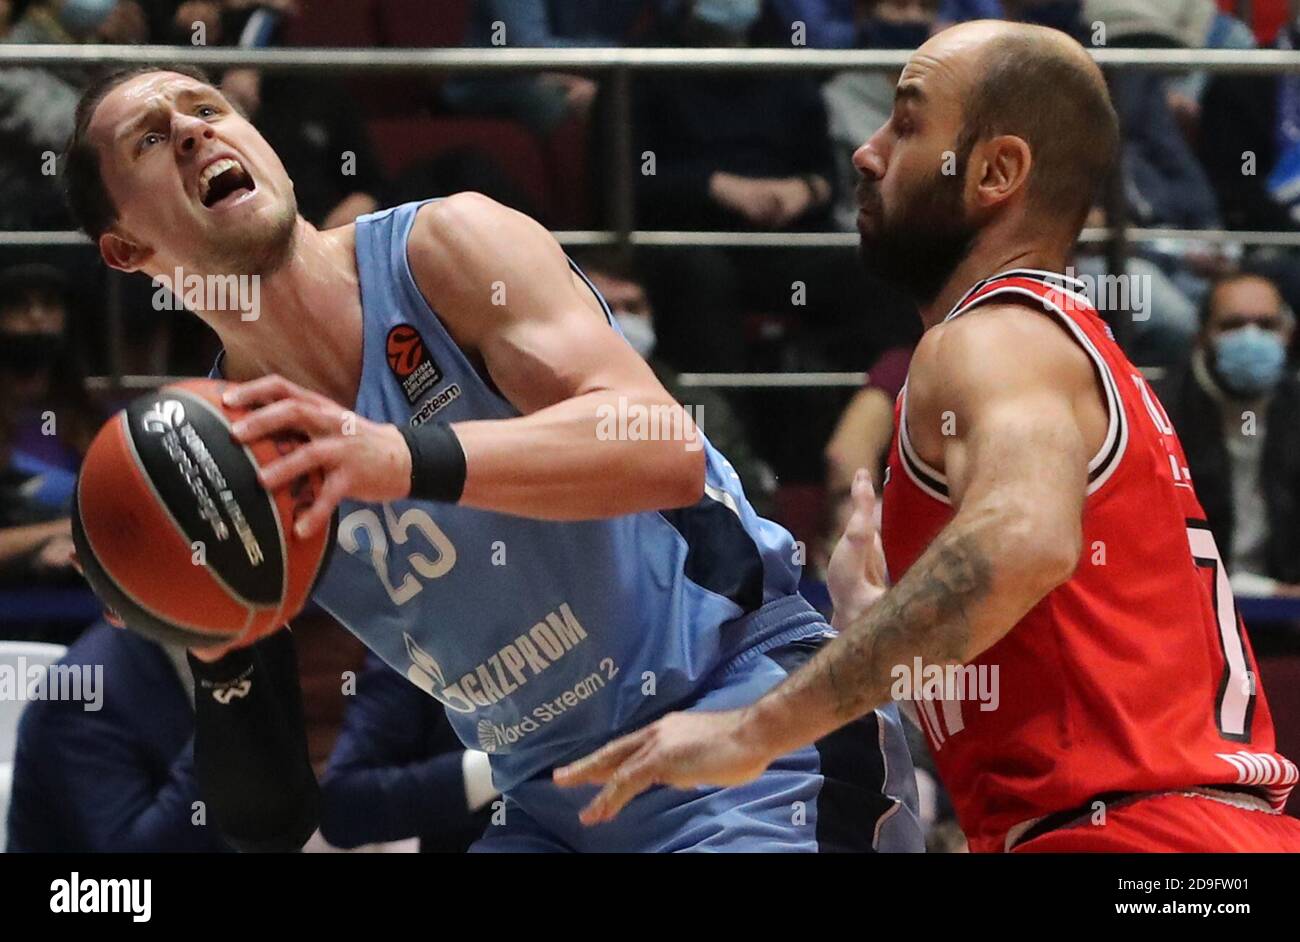 St Petersburg, Russia. 5th Nov, 2020. Zenit St Petersburg's Mateusz Ponitka  (L) and Olympiacos Piraeus's Vassilis Spanoulis in a 2020-21 Euroleague  Regular Season Round 7 basketball match between Zenit St Petersburg and